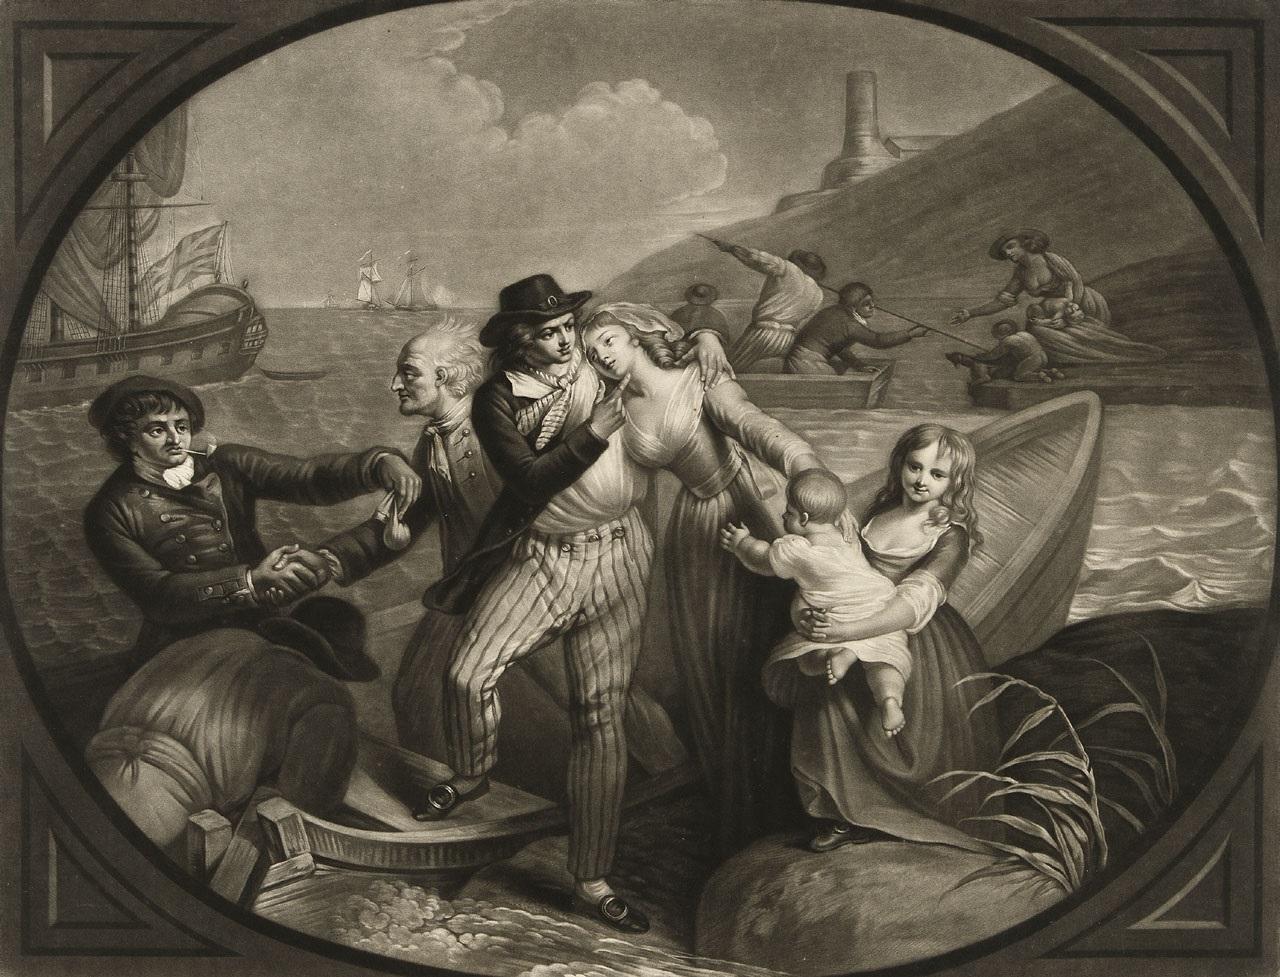 A print showing sailors saying goodbye to their loved ones in the 18th century